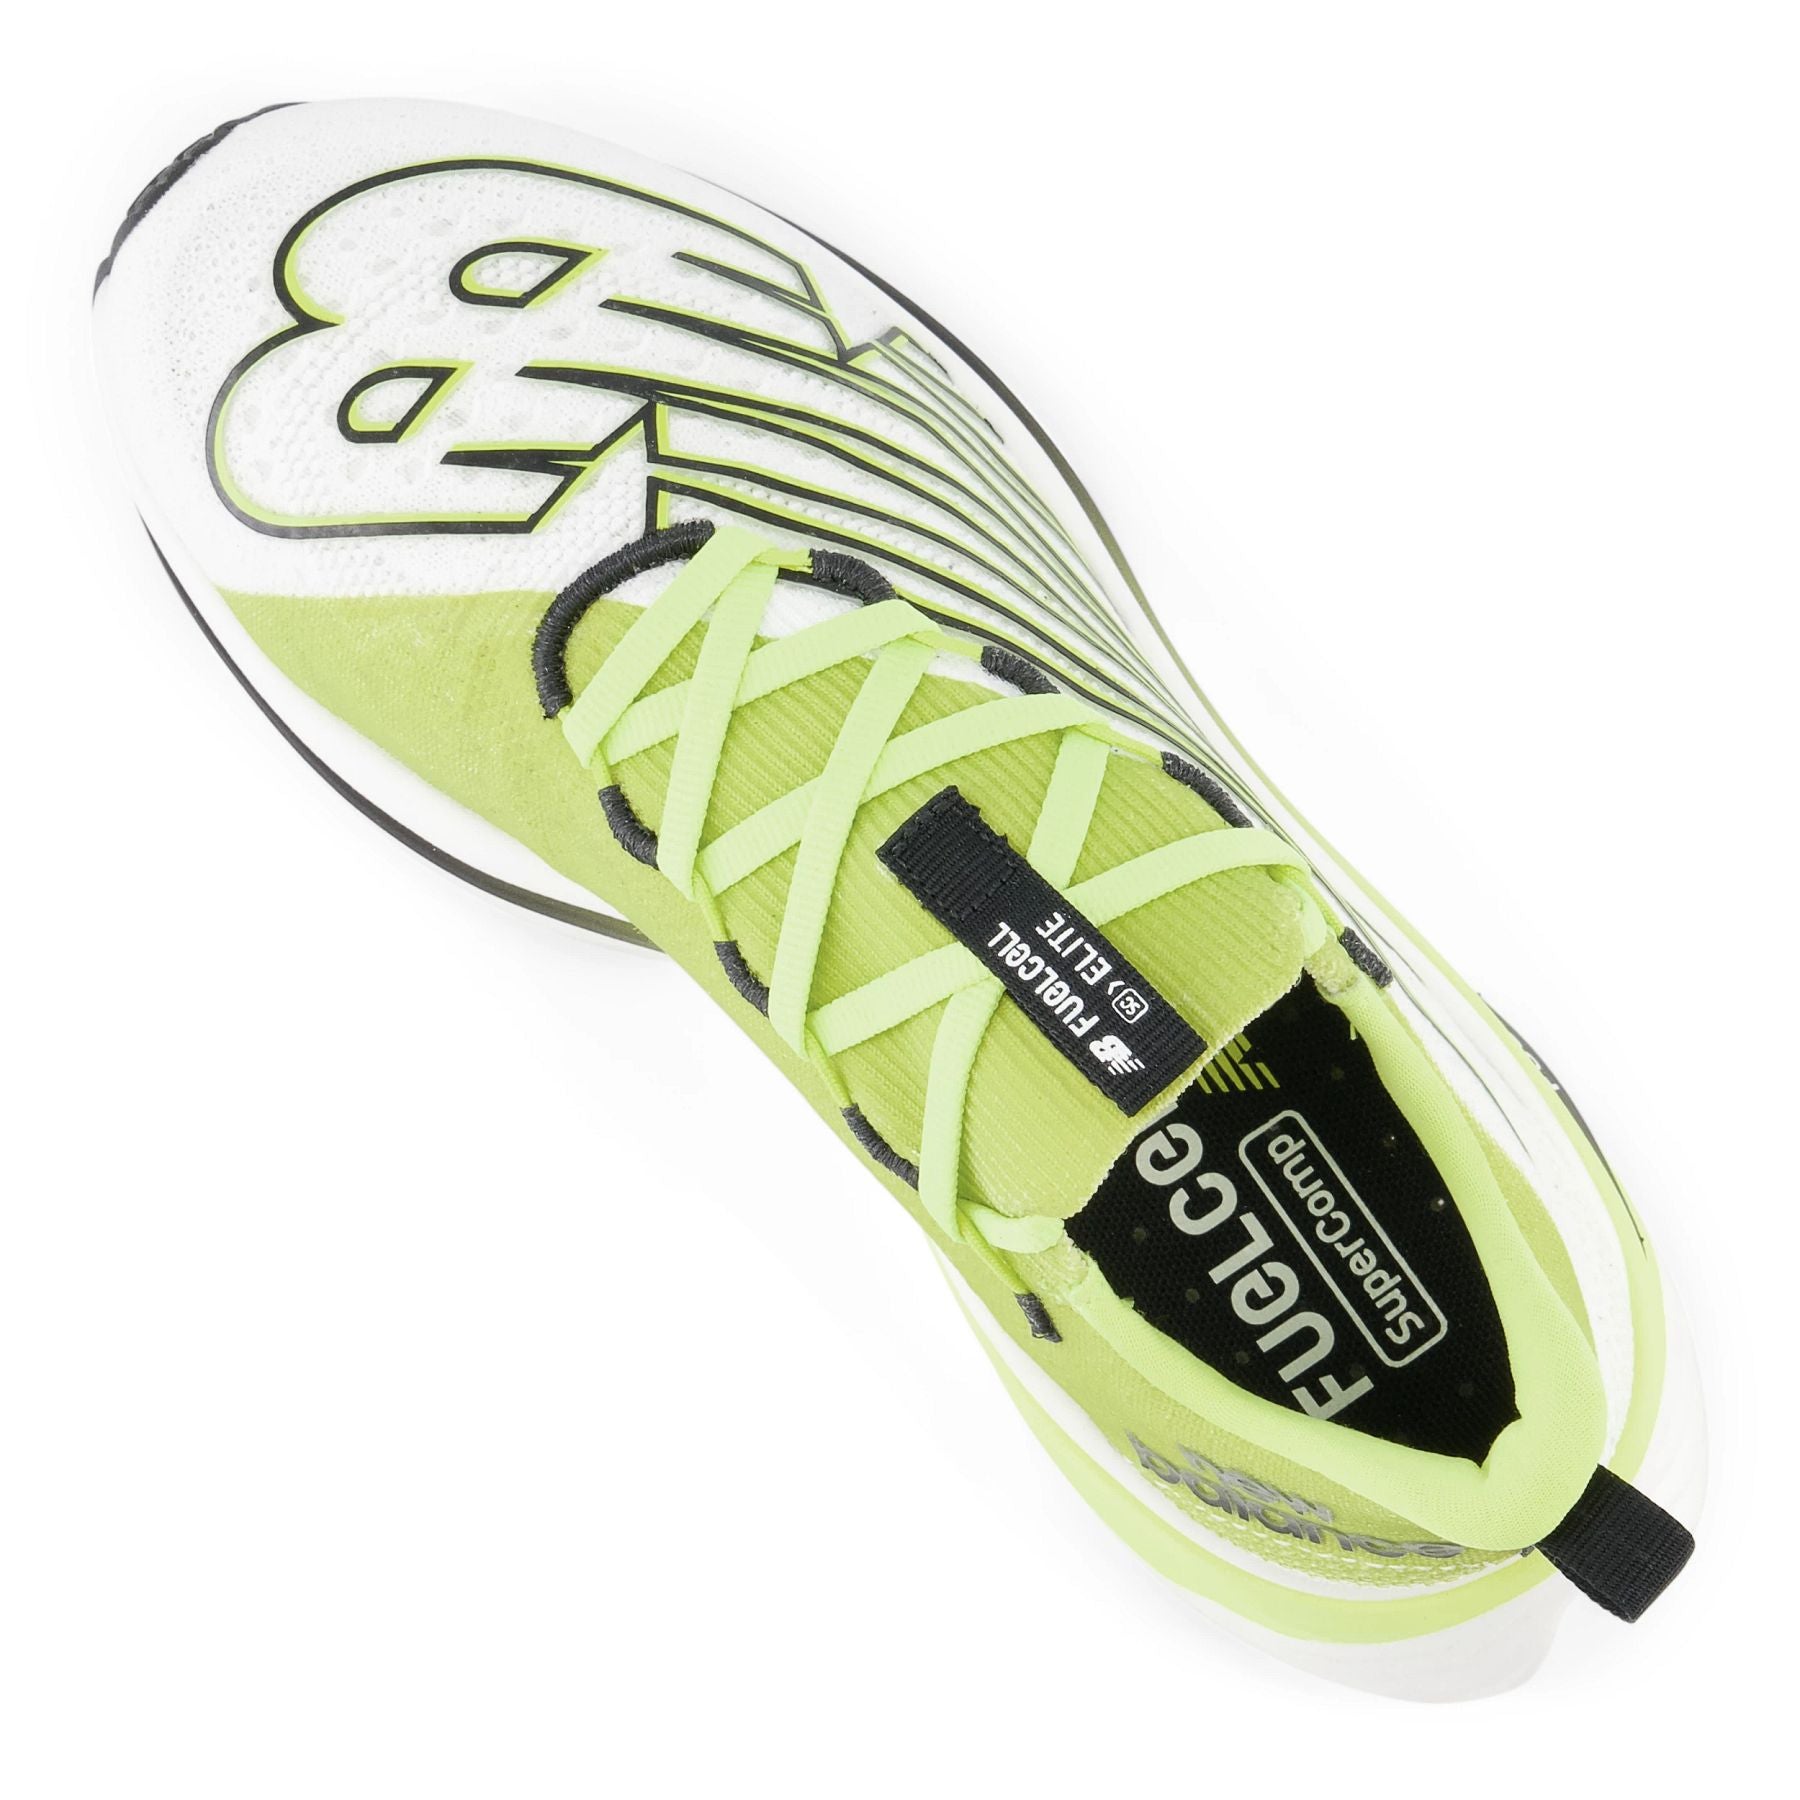 Top angle view of the Men's Super Comp Elite V3 in Thirty Watt/Black/Cosmic Rose